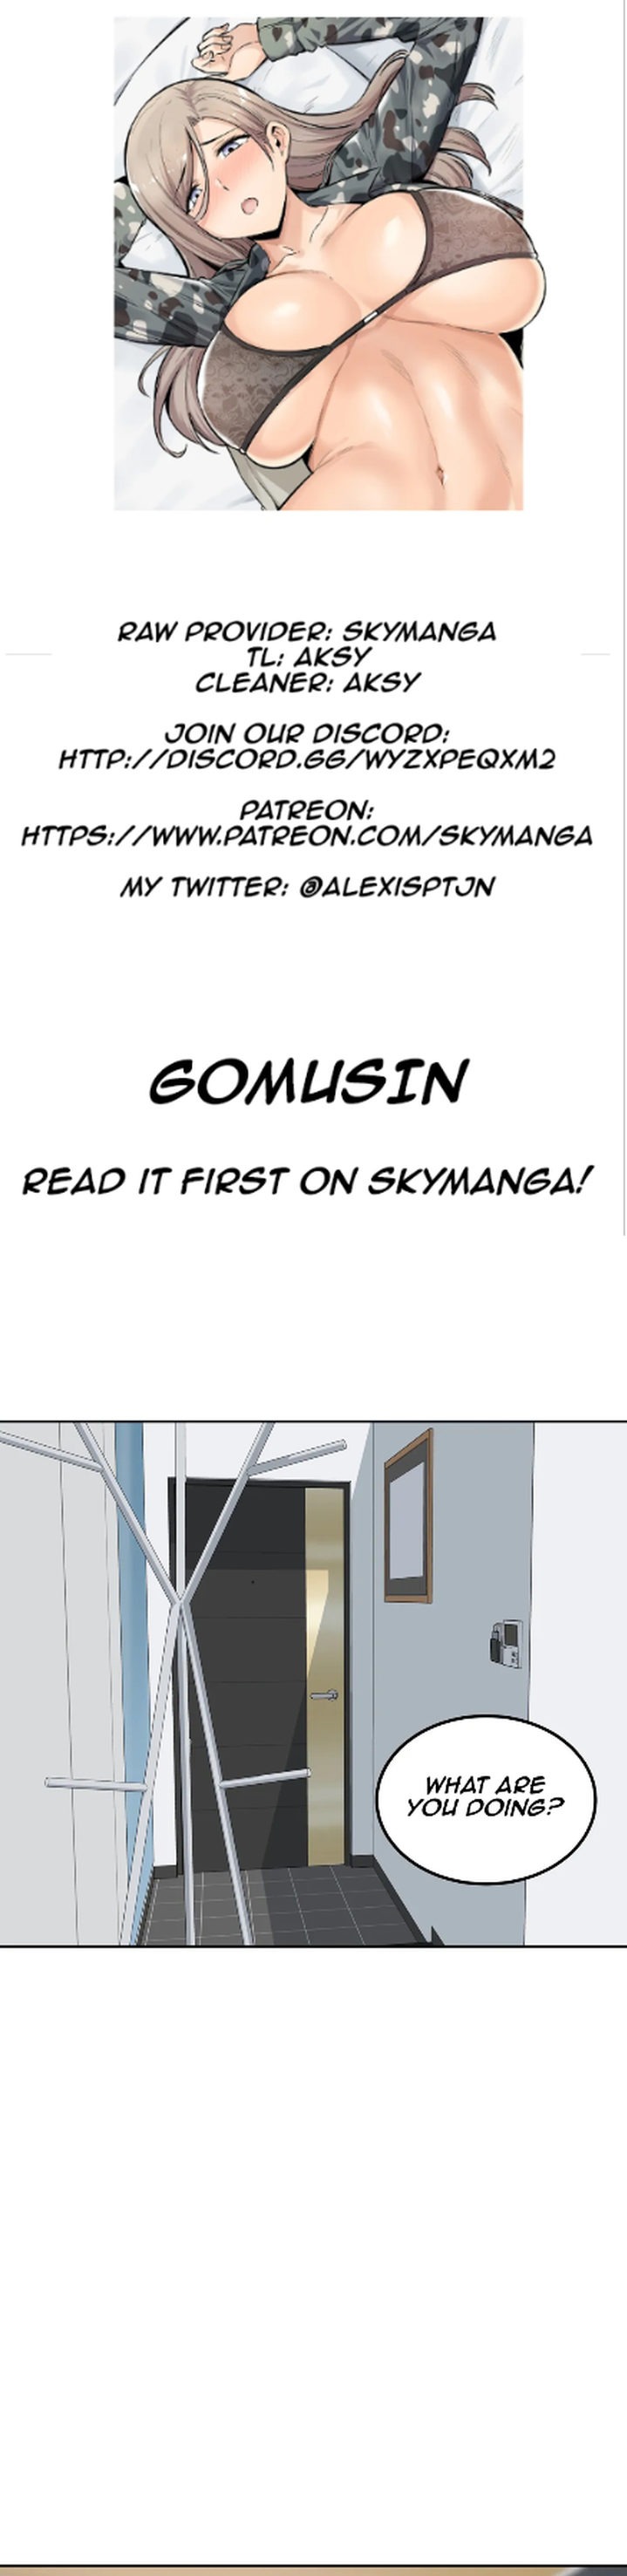 Gomusin - Chapter 8 Page 1